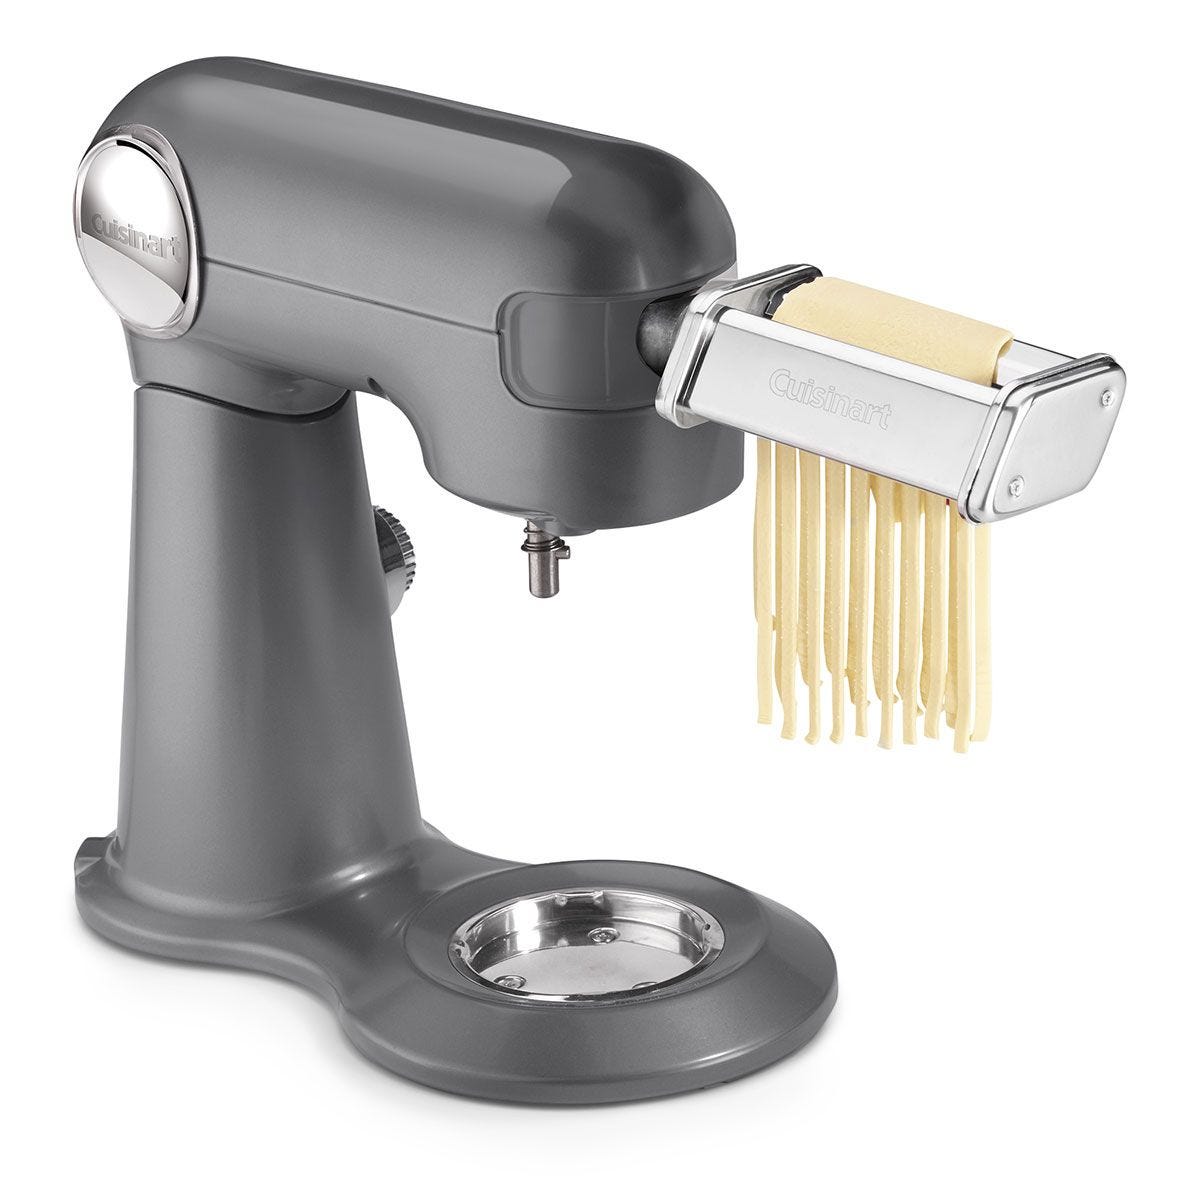 Cuisinart® Pasta Roller and Cutter Attachment for 5.5 Qt. Stand Mixer  (SM-50)